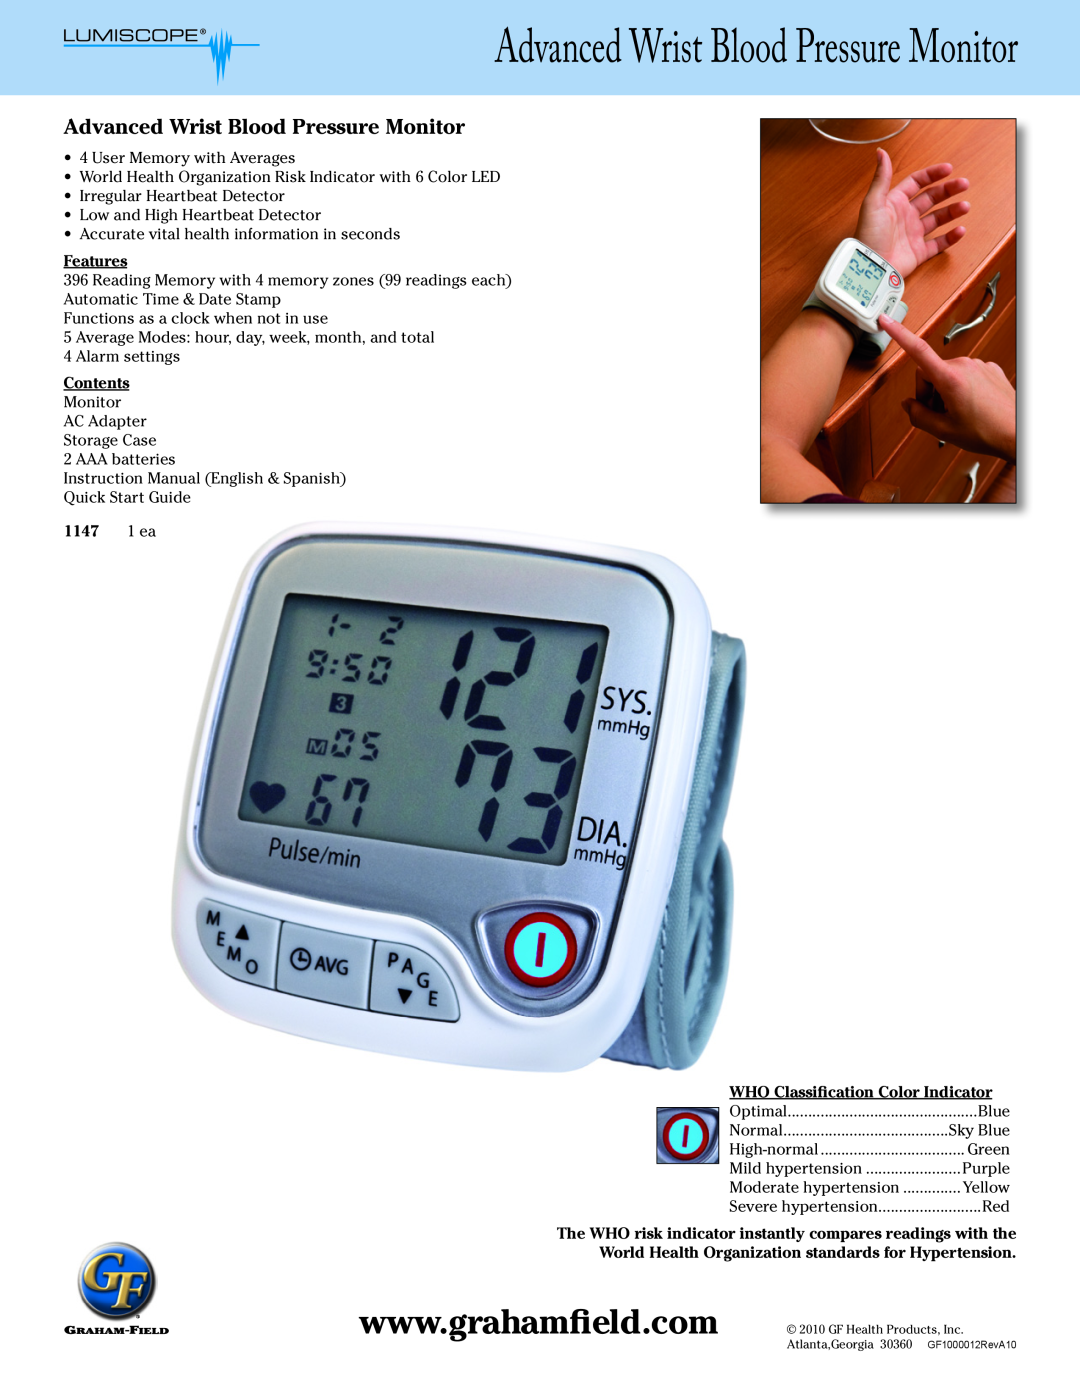 Graham Field 1147 instruction manual Advanced Wrist Blood Pressure Monitor, Features, Contents, 1 ea 